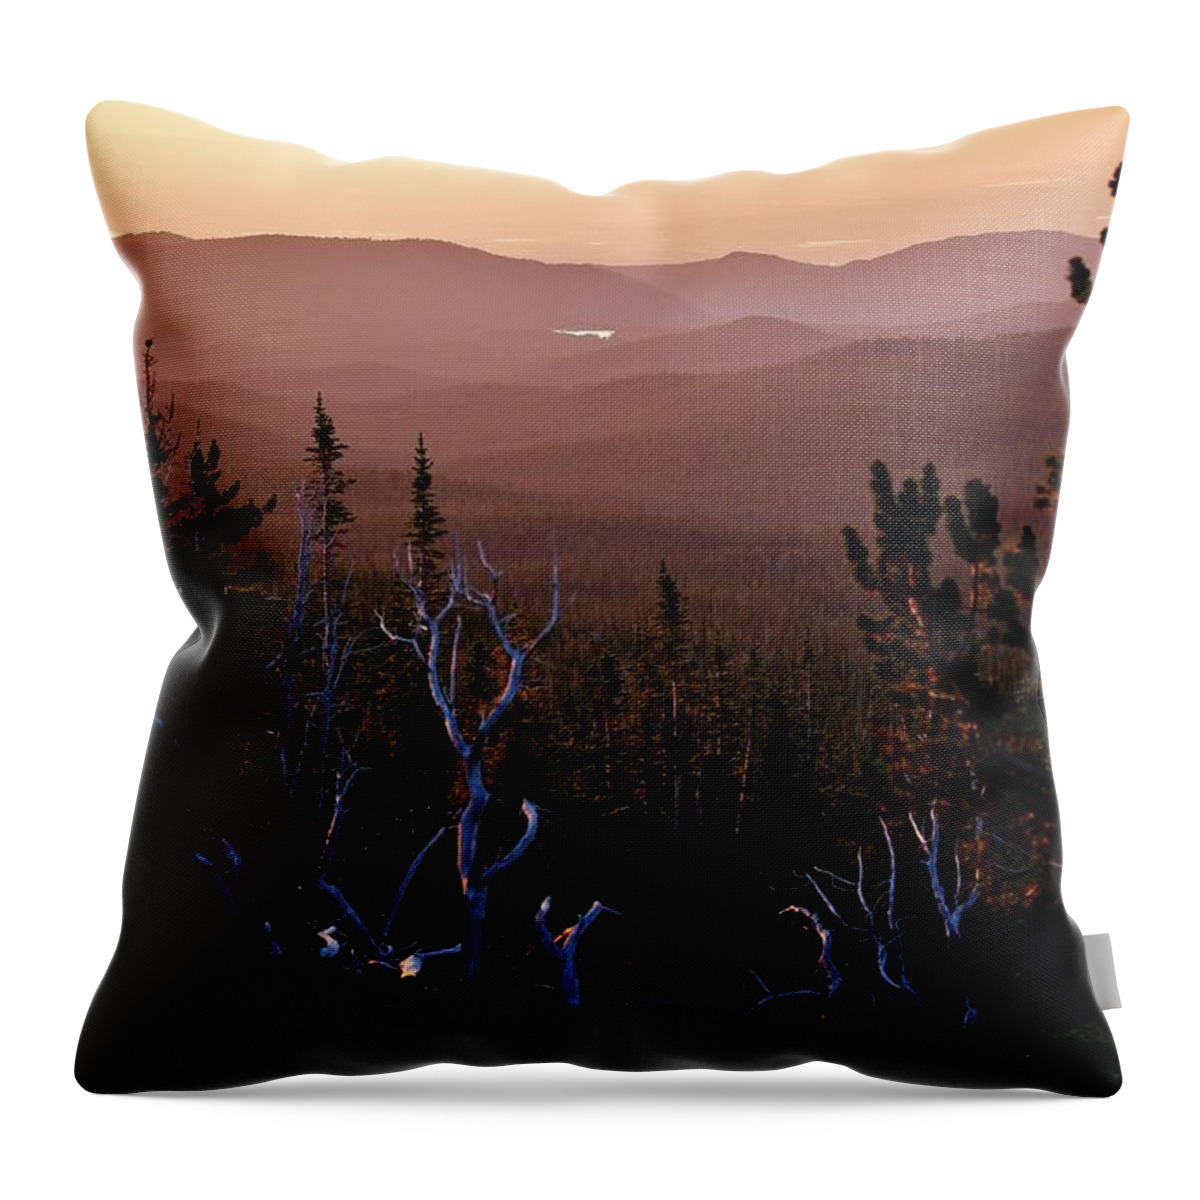 Audubon Throw Pillow featuring the photograph Morning Tree Line by David Broome